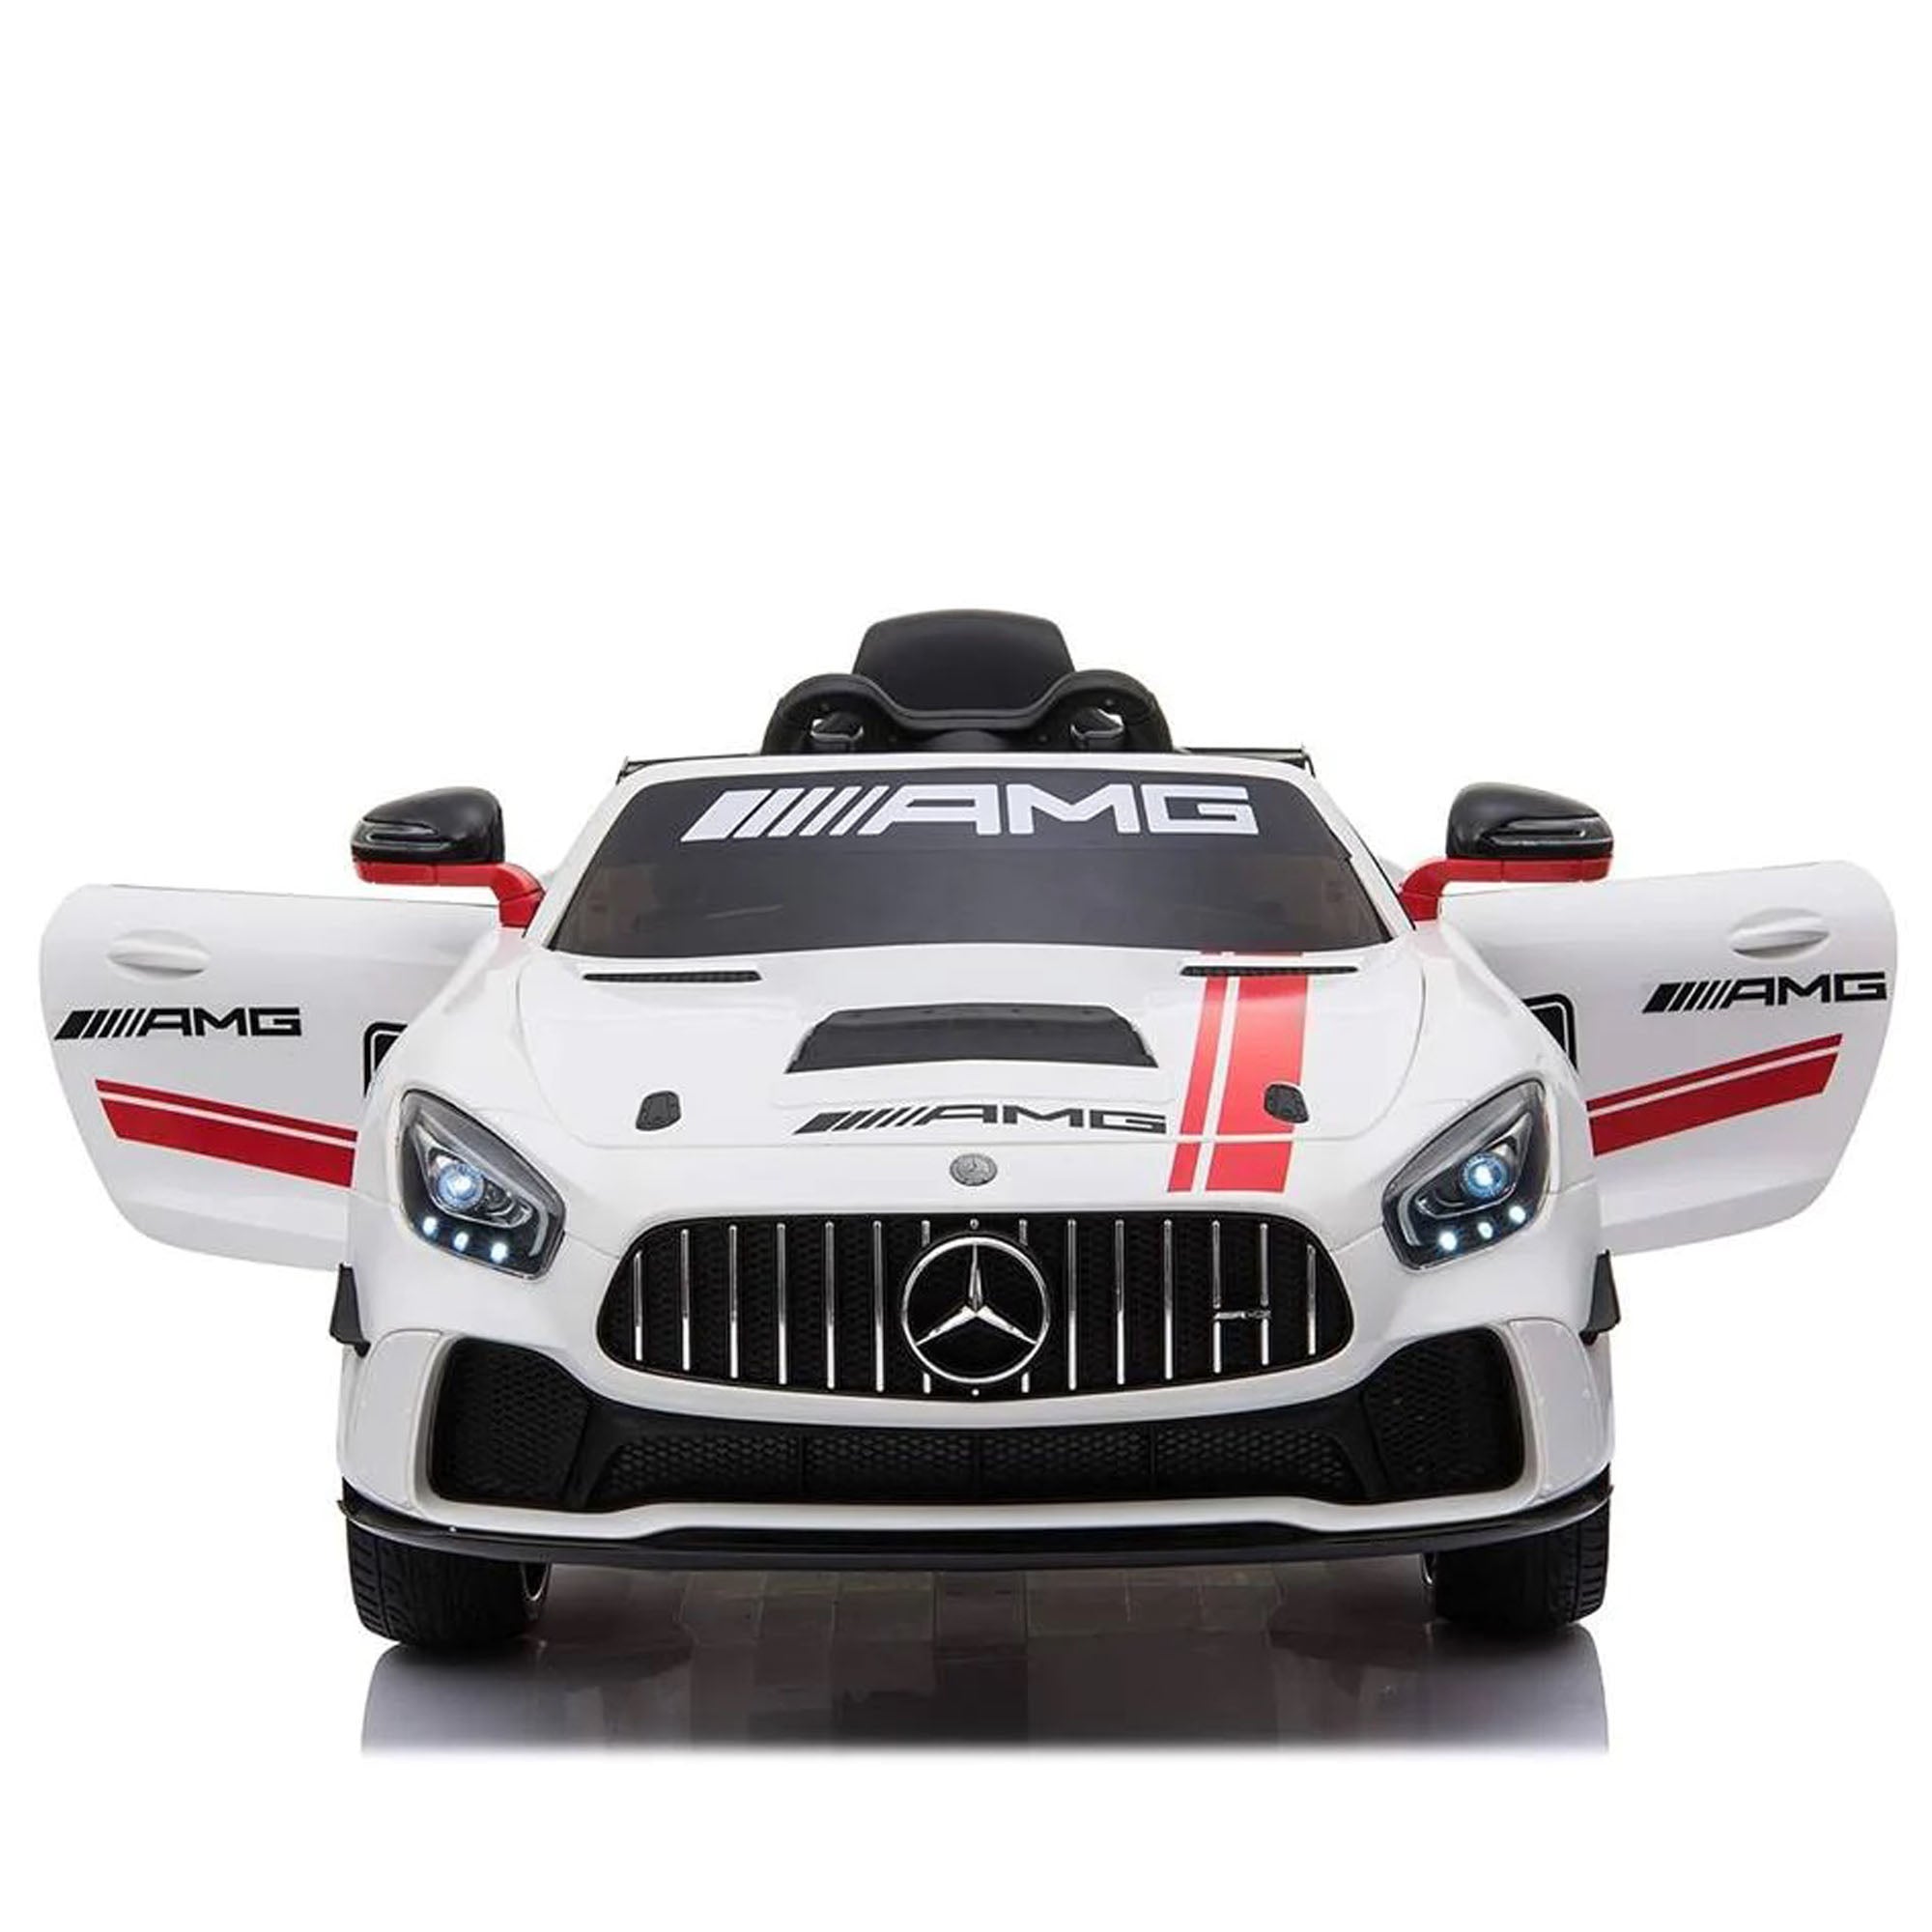 Mercedes Benz AMG GT4 Electric Ride On Car with Remote Control for Kids